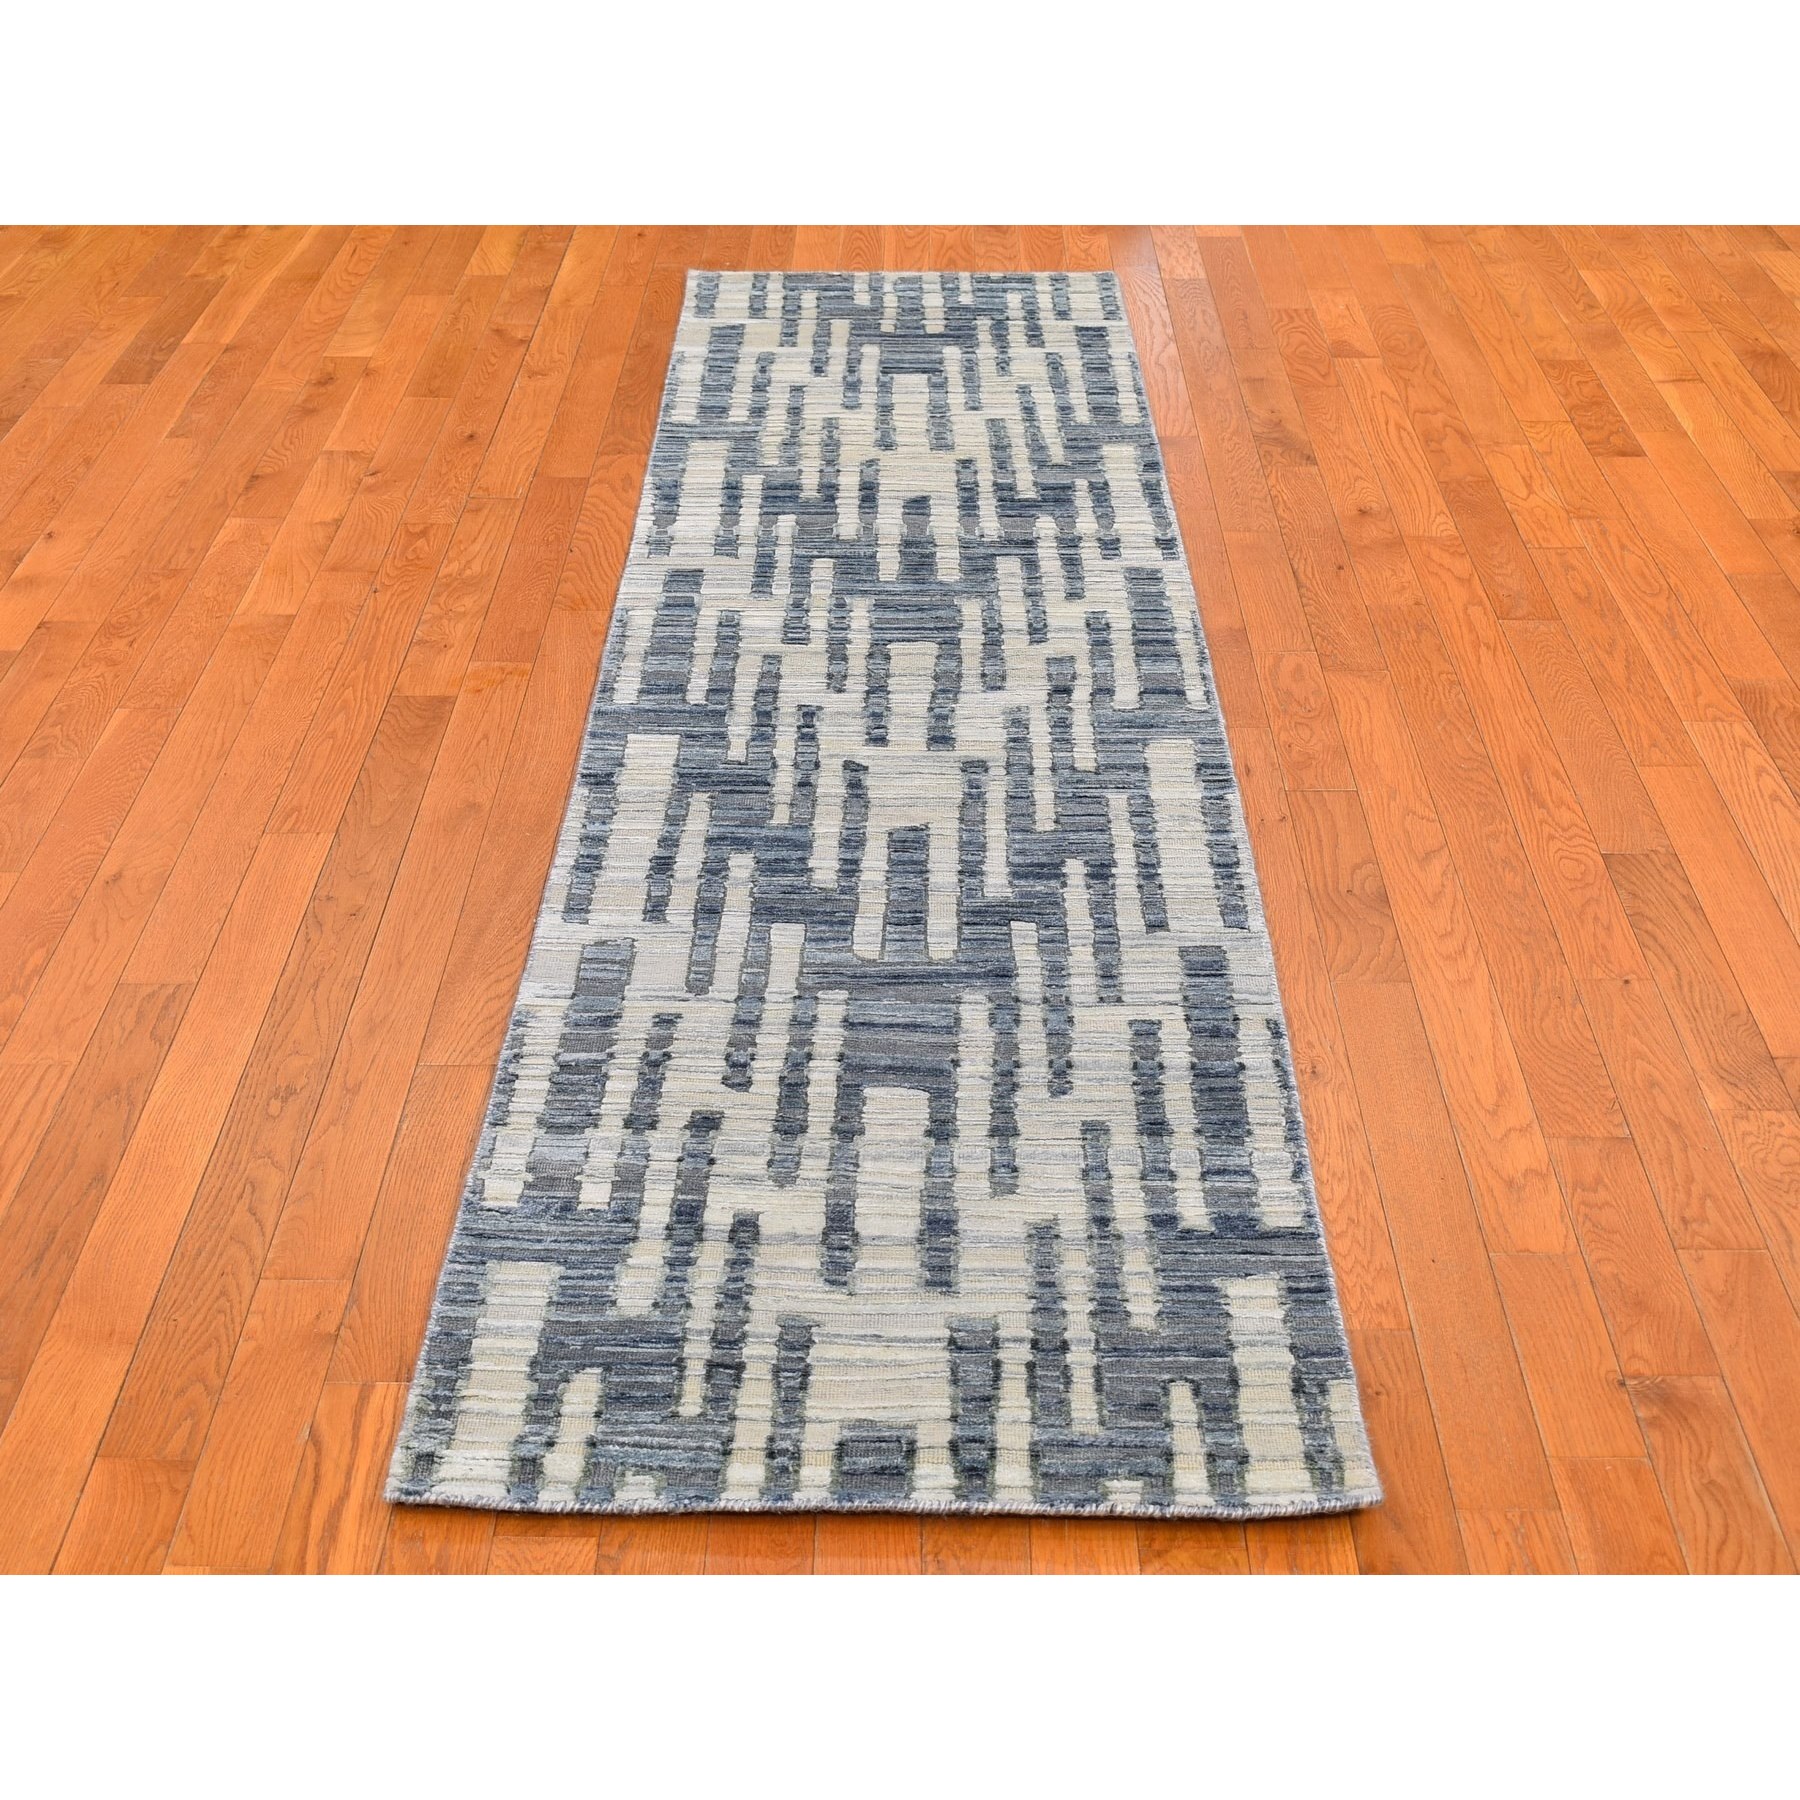 2'6"x10'3" Blue Pure Silk and Textured Wool Wide Runner Zigzag with Graph Design Hand Woven Oriental Rug 